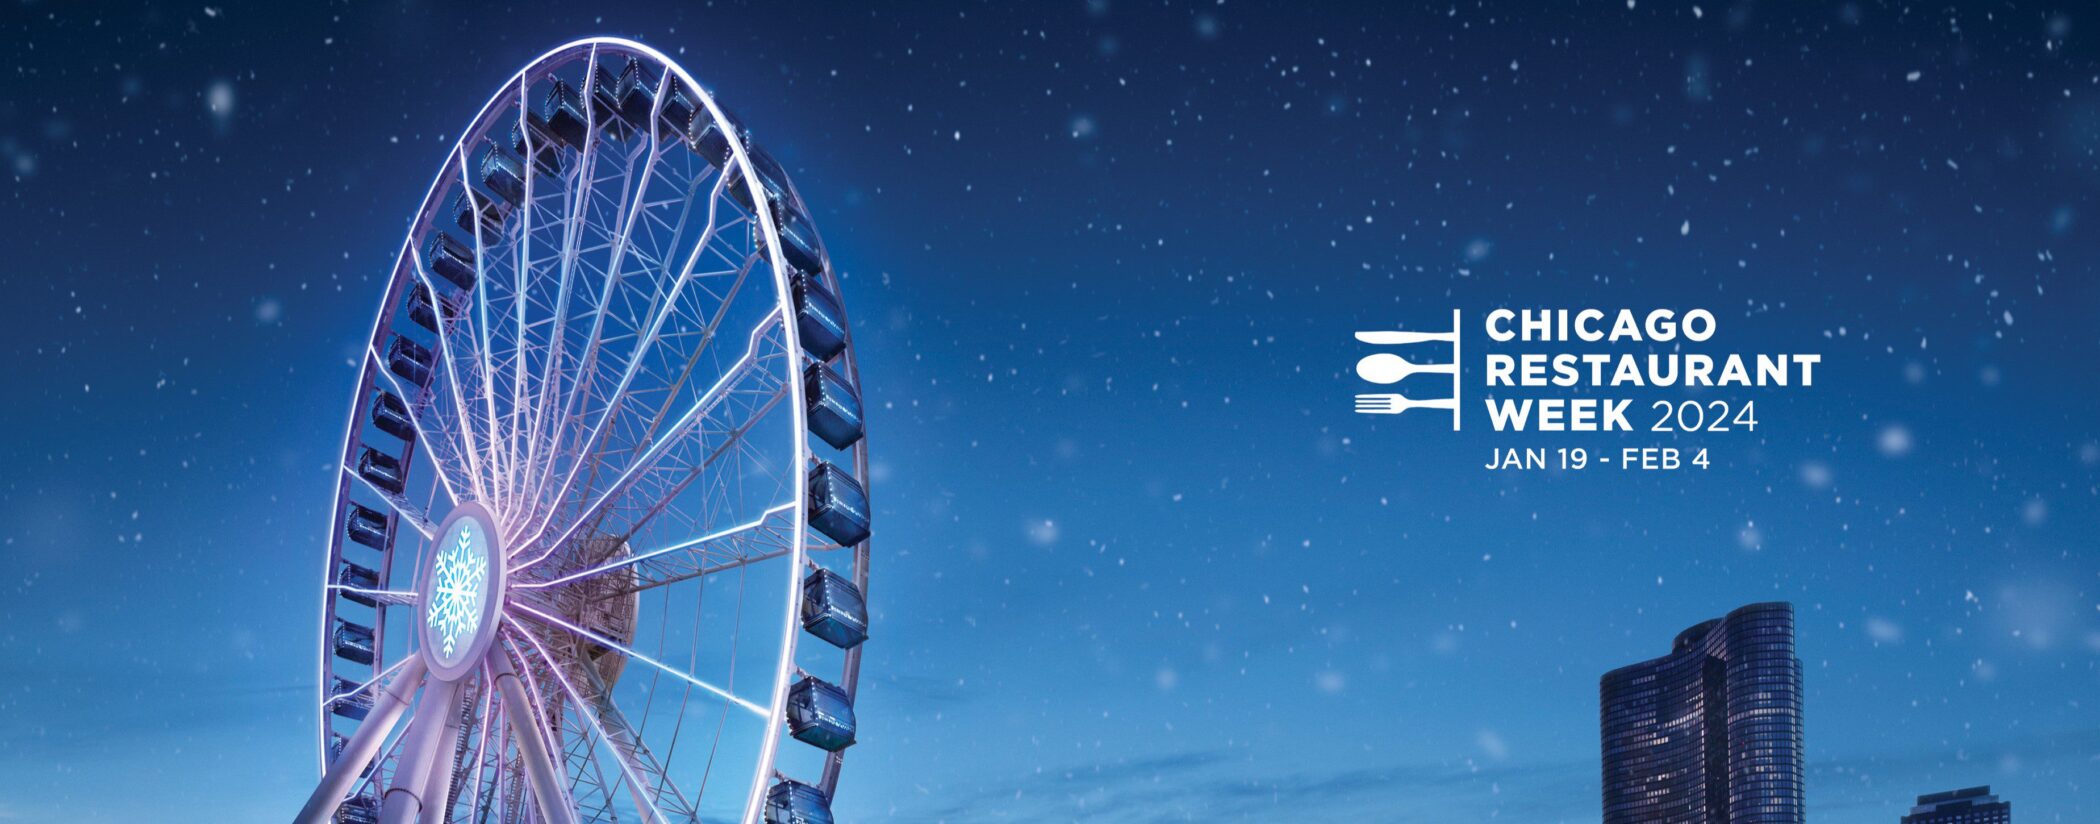 Poster with Centennial Wheel for Chicago Restaurant Week 2024.